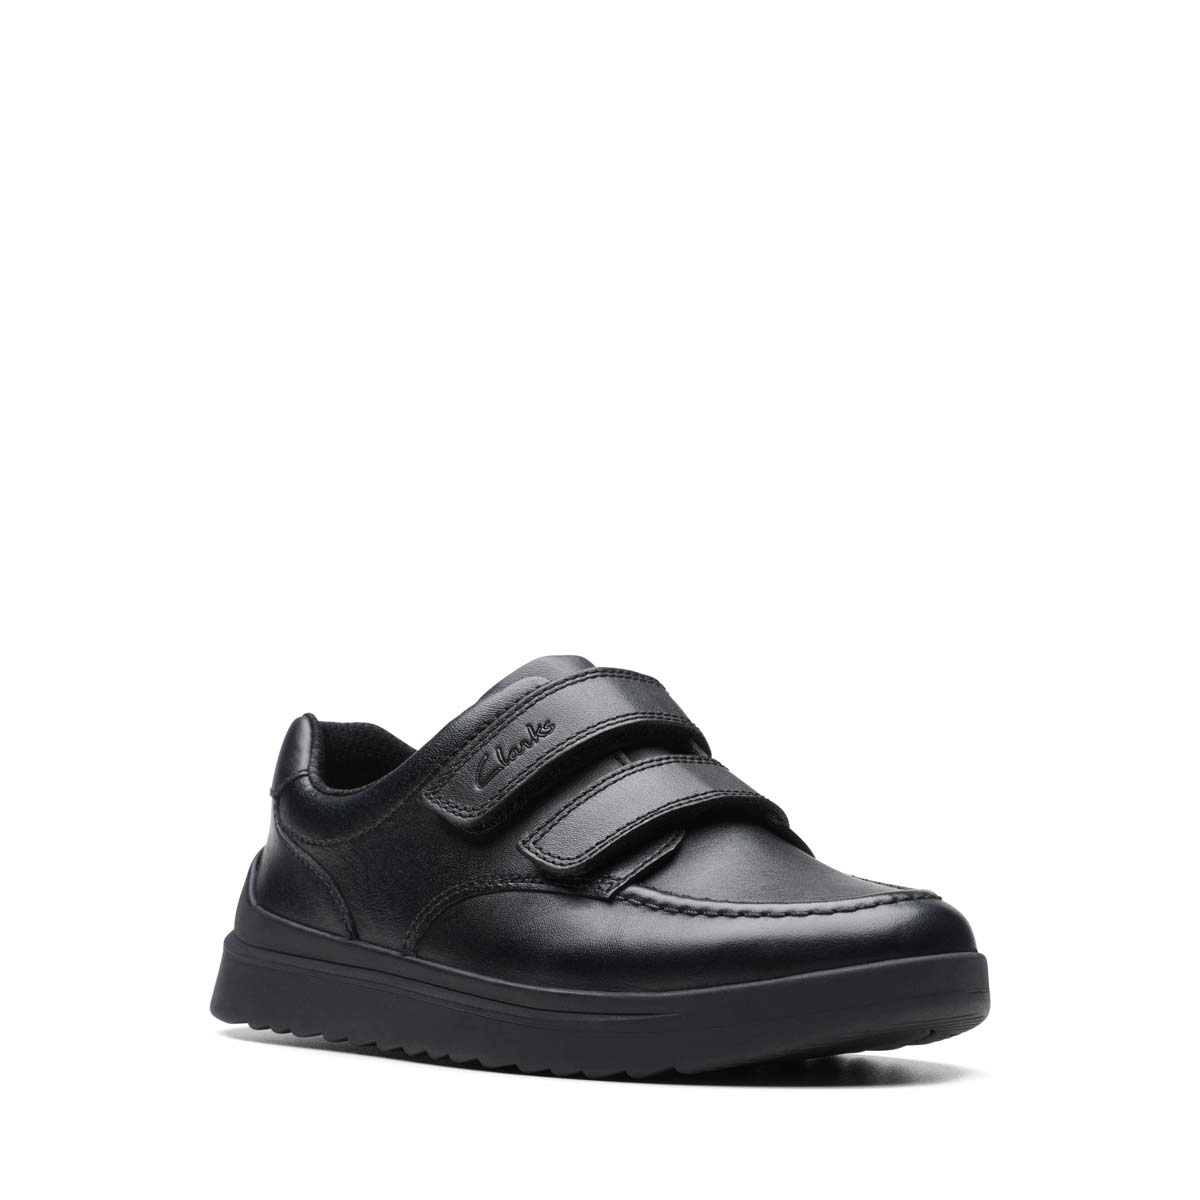 Clarks Goal Style K Black Leather Kids Boys Shoes 753546F In Size 2.5 In Plain Black Leather F Width Fitting Regular Fit For School For kids